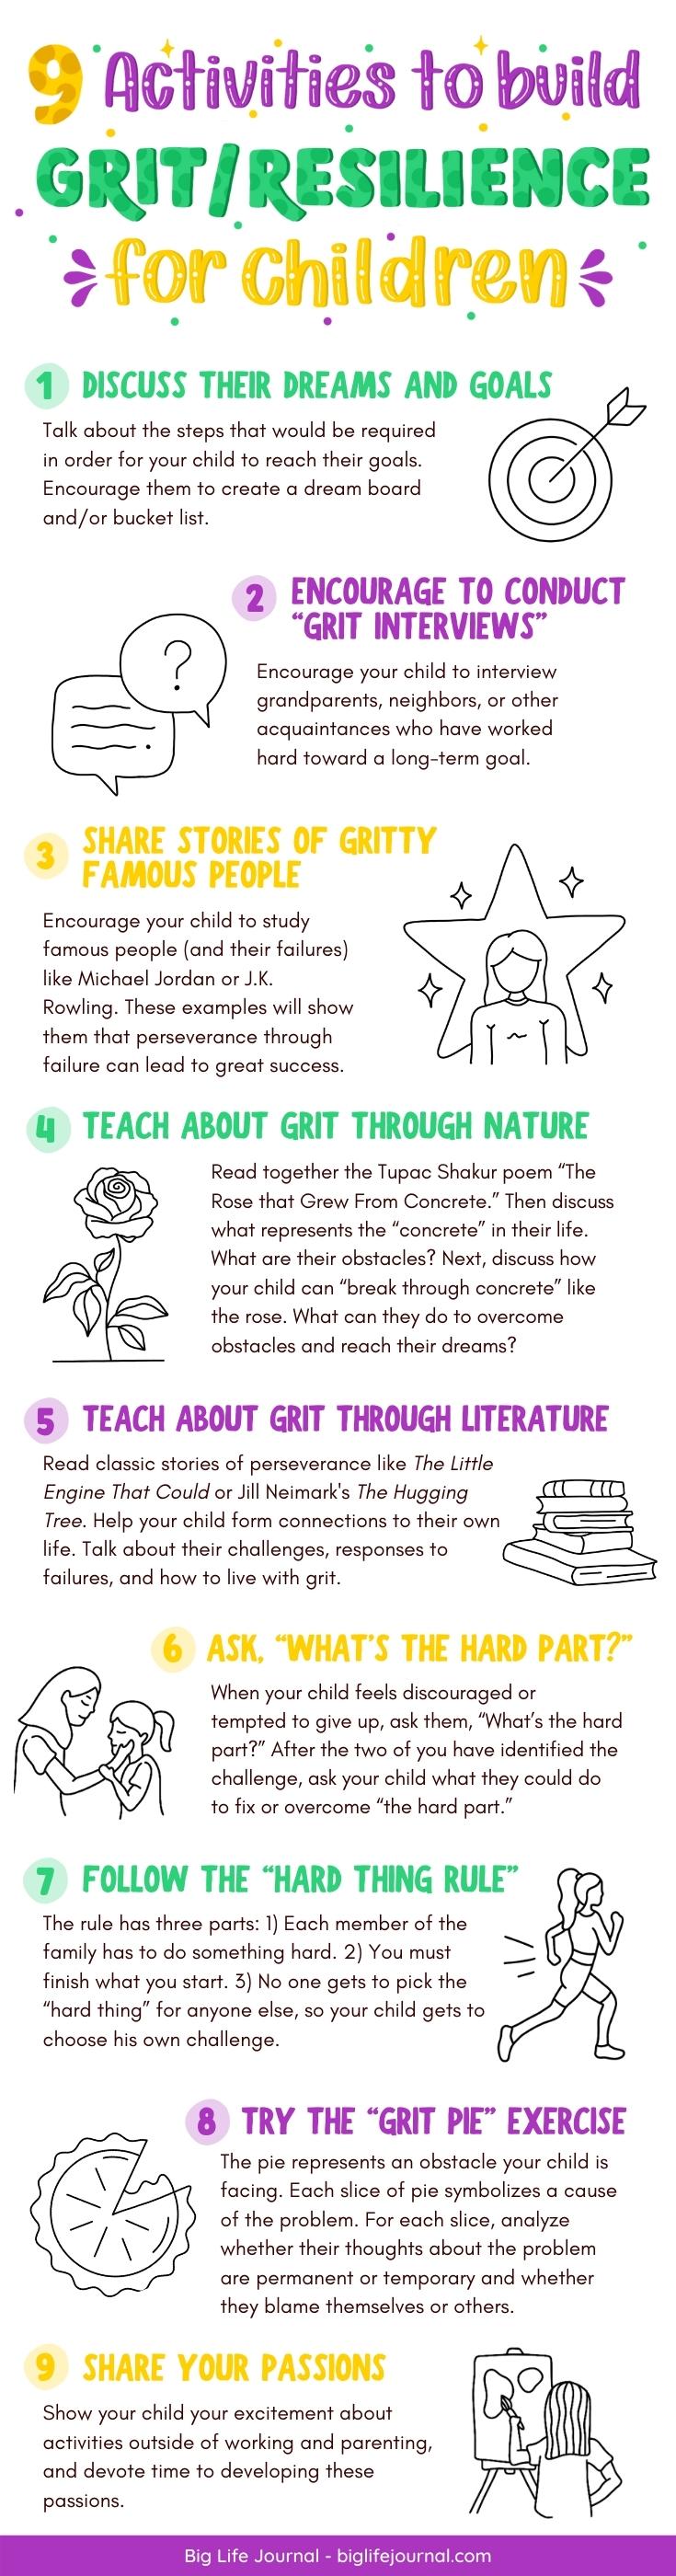 9 Activities to Build Grit and Resilience in Children